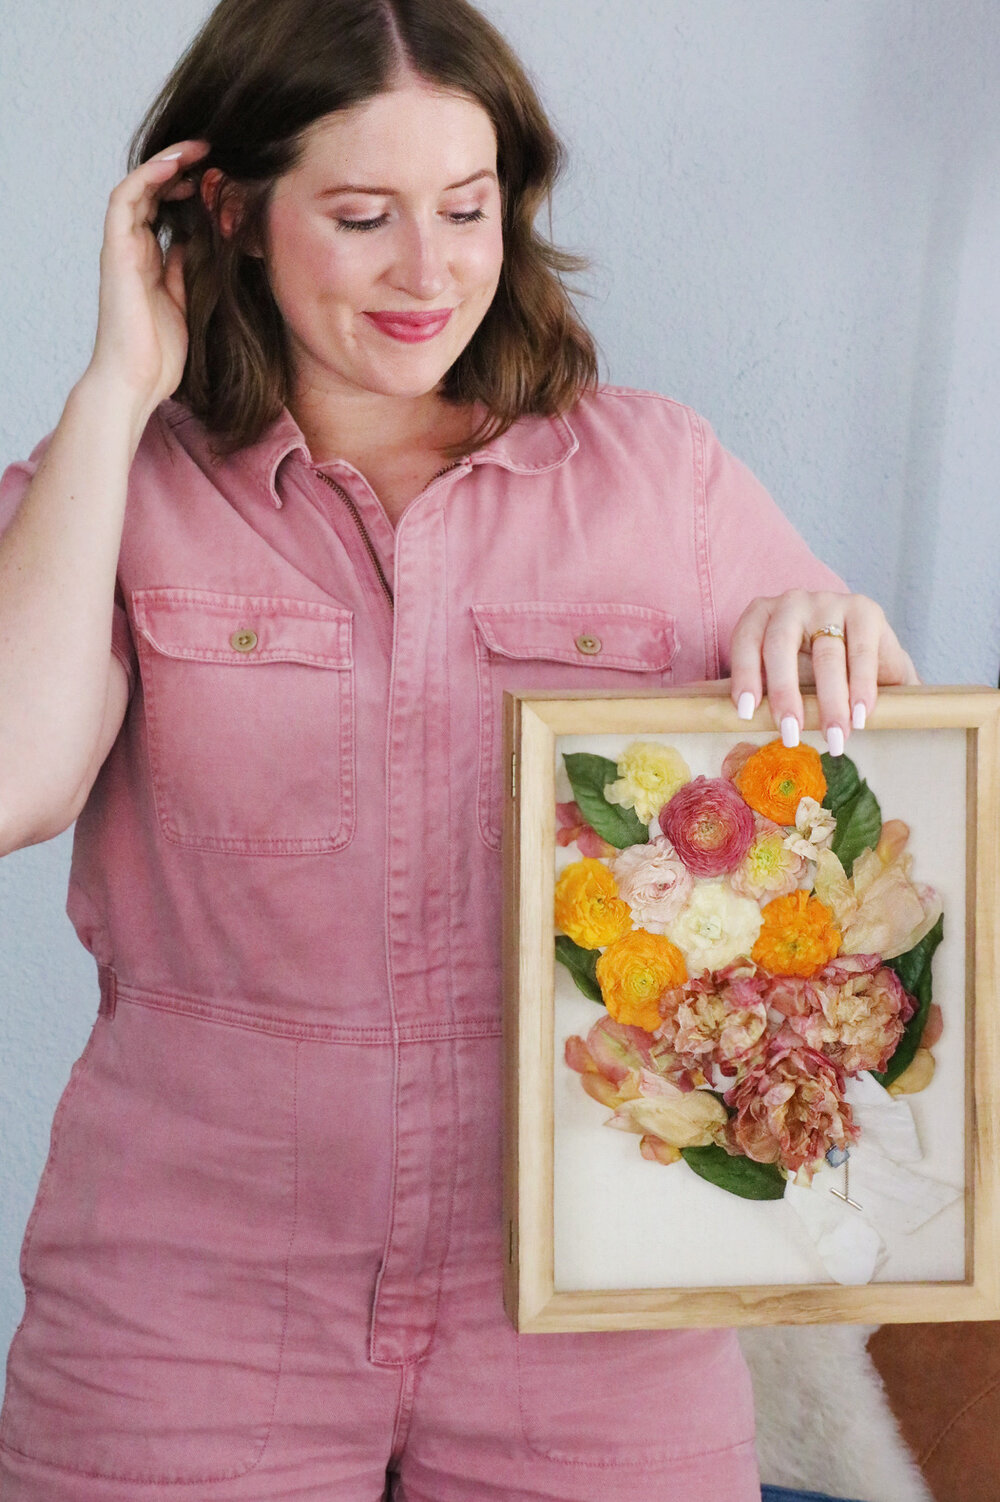 How To Dry Rose Petals: 6 Fast & Easy Ways To Preserve Flowers